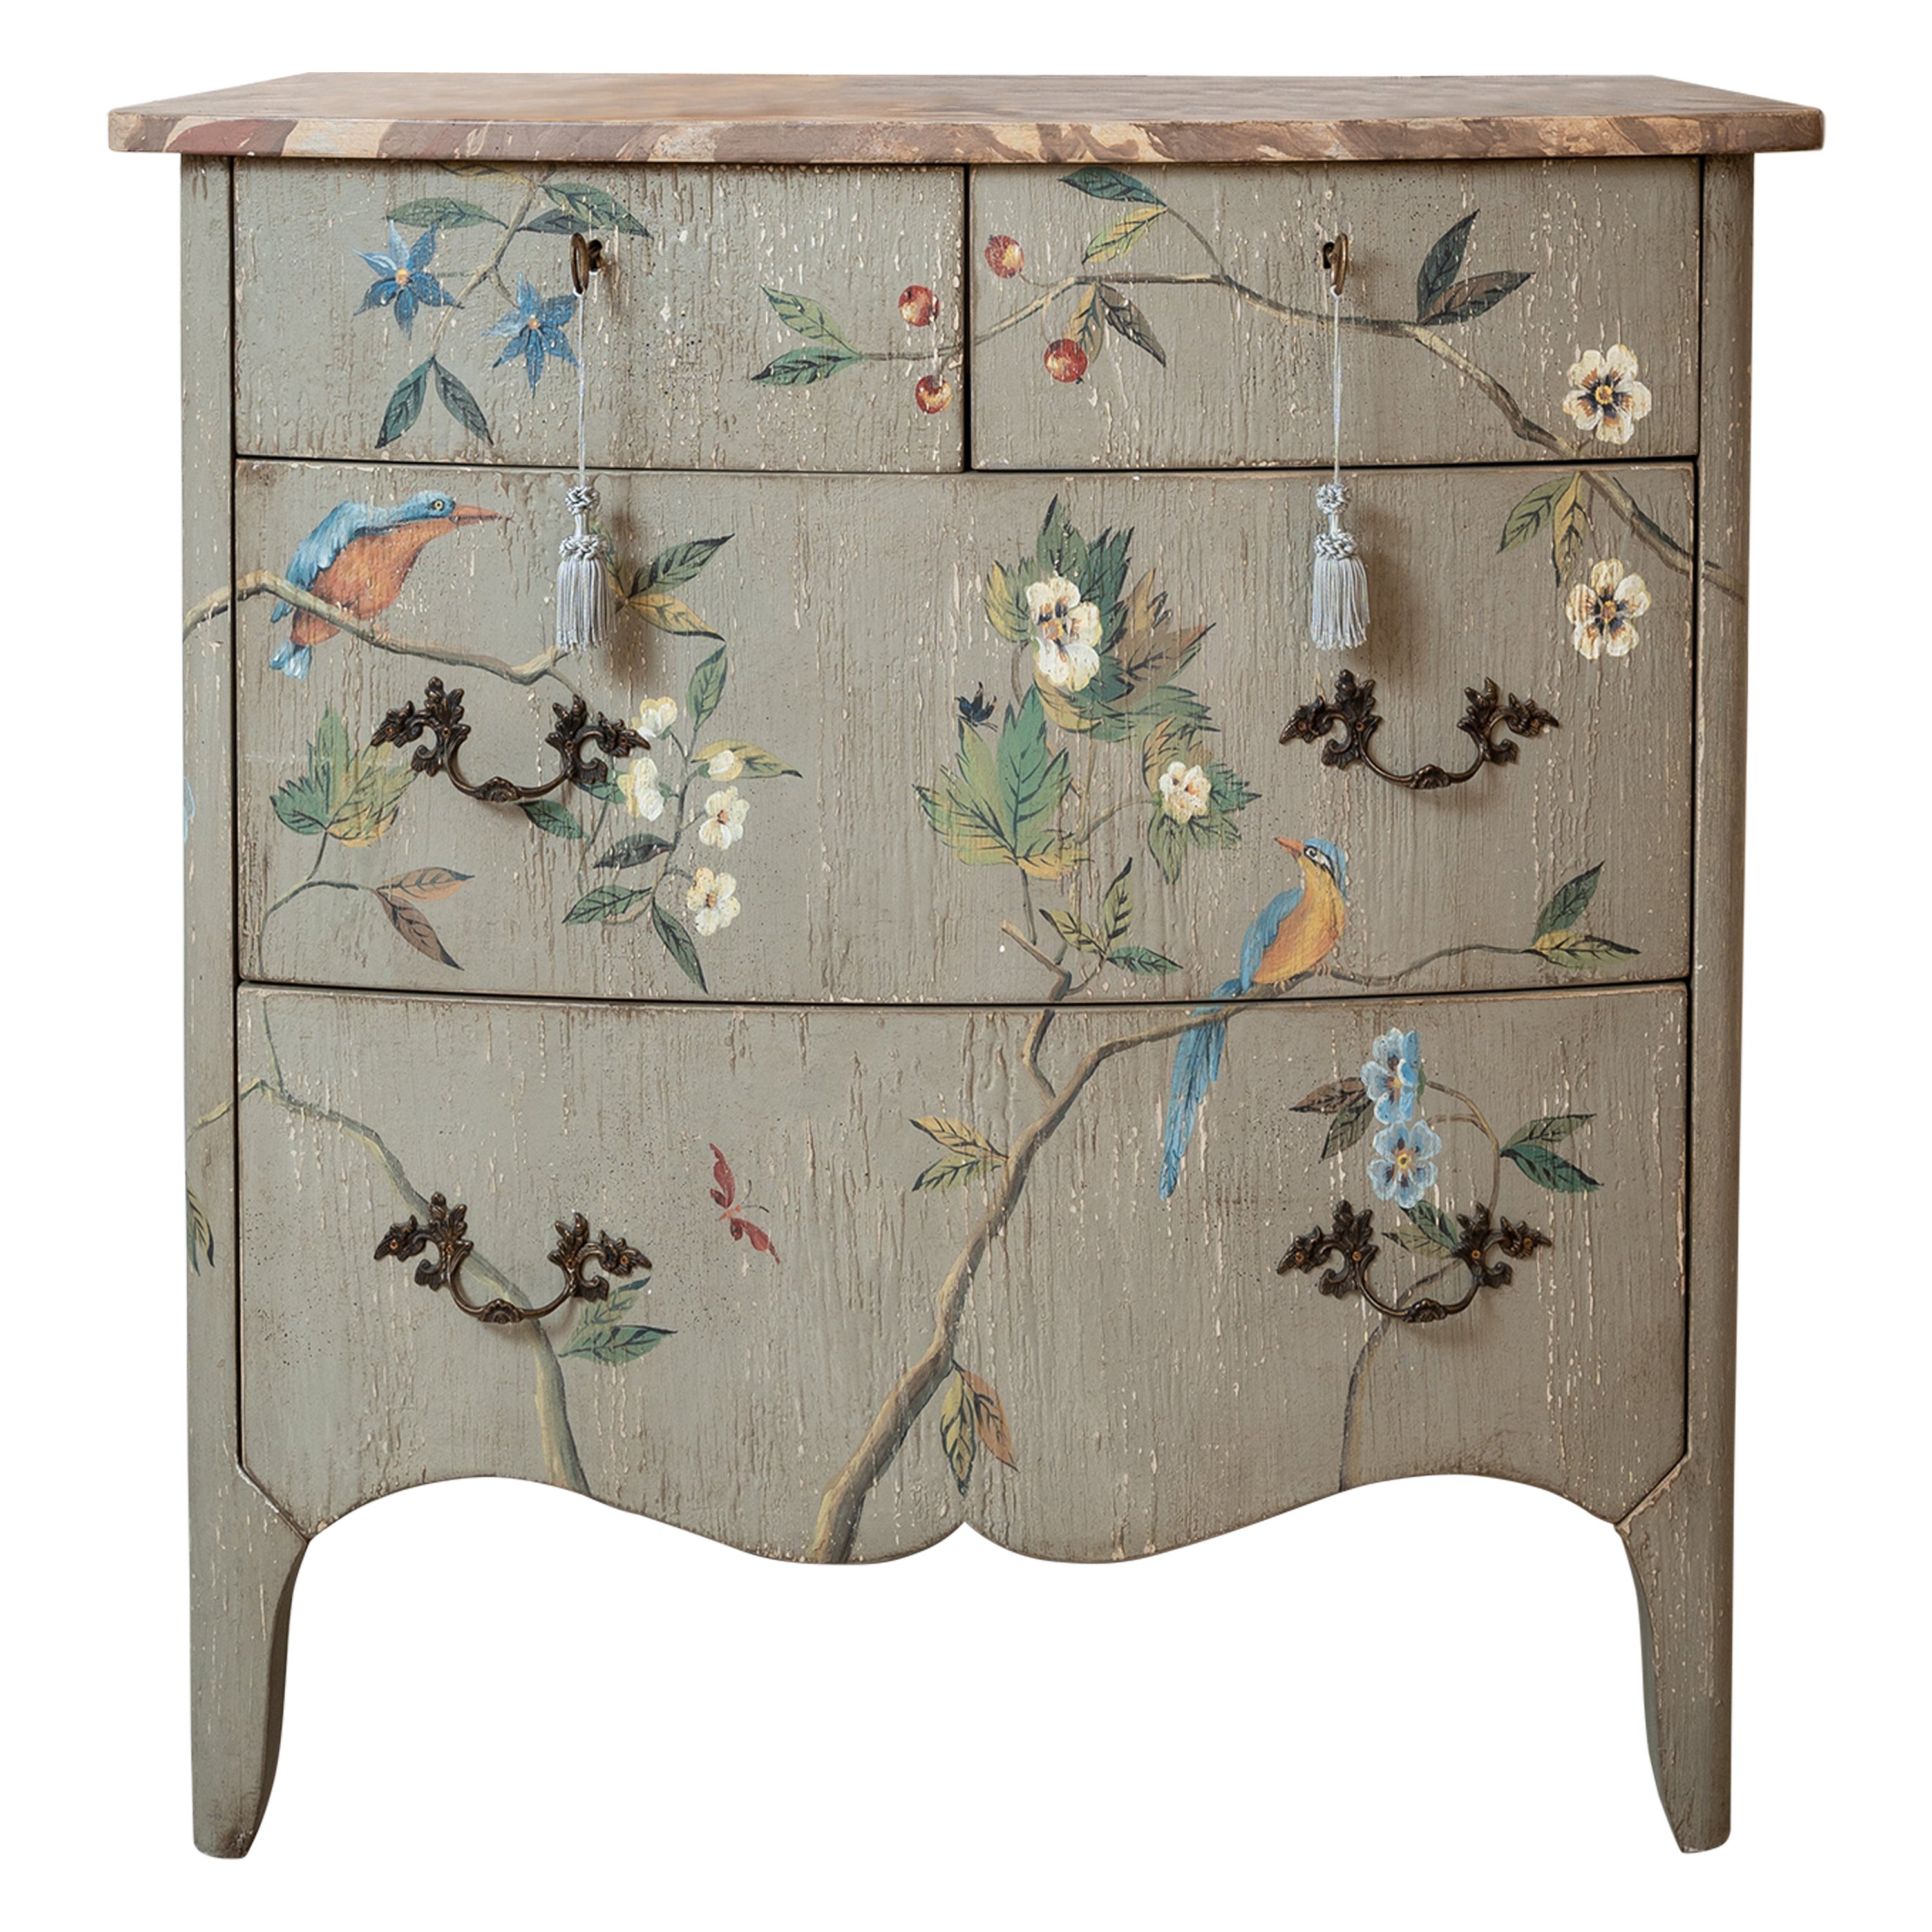 18th Century Hand-Painted Venetian Style Dorsoduro Chest with Blooming Flowers For Sale